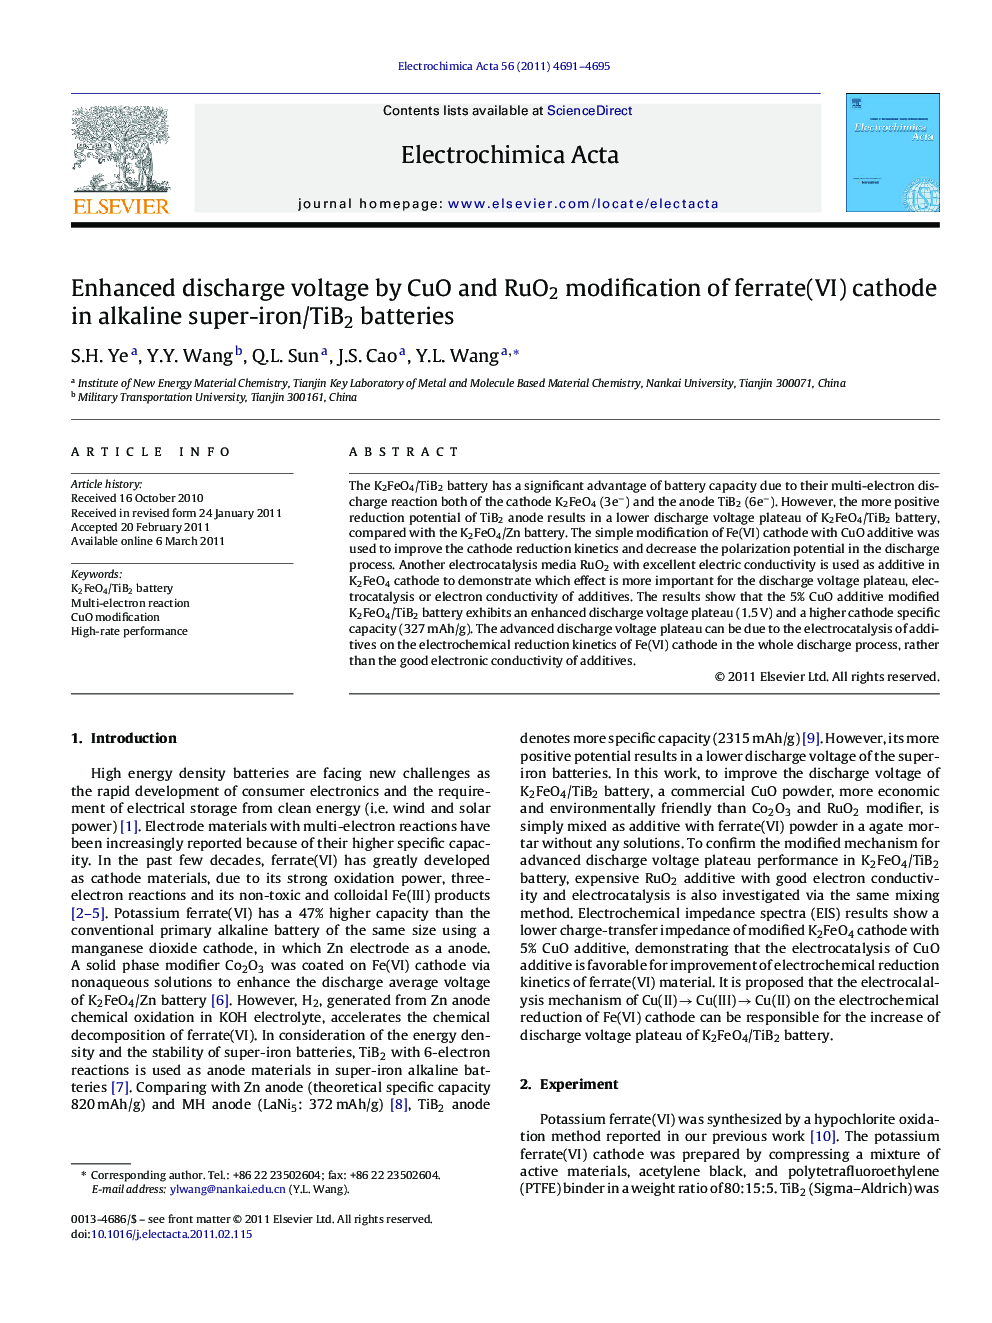 Enhanced discharge voltage by CuO and RuO2 modification of ferrate(VI) cathode in alkaline super-iron/TiB2 batteries